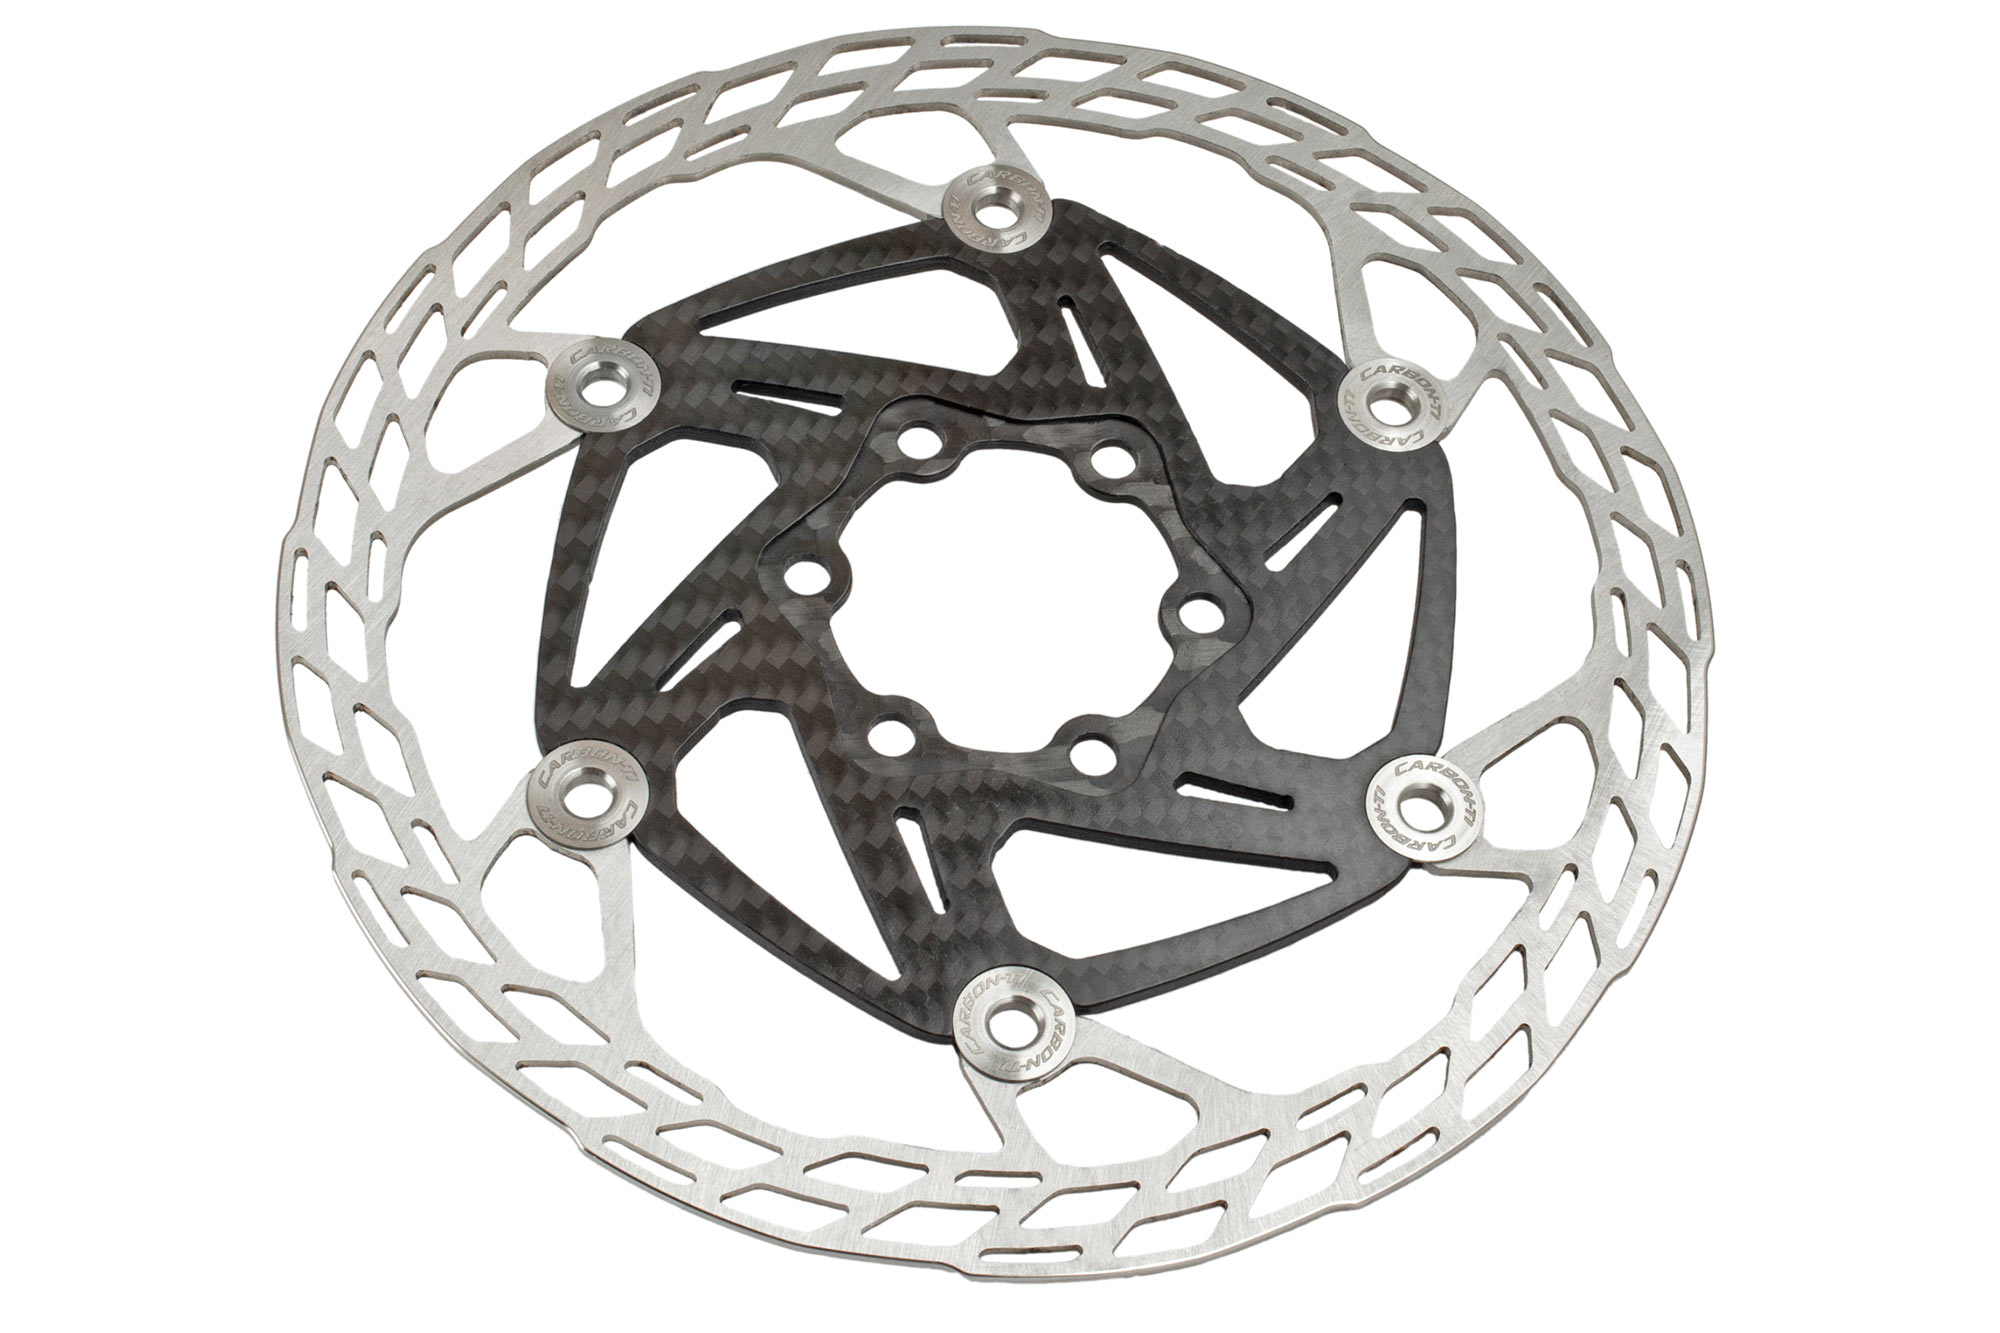 Carbon-Ti X-Rotor SteelCarbon 3 updated lightweight 6-bolt or Centerlock disc brake rotors, 160mm